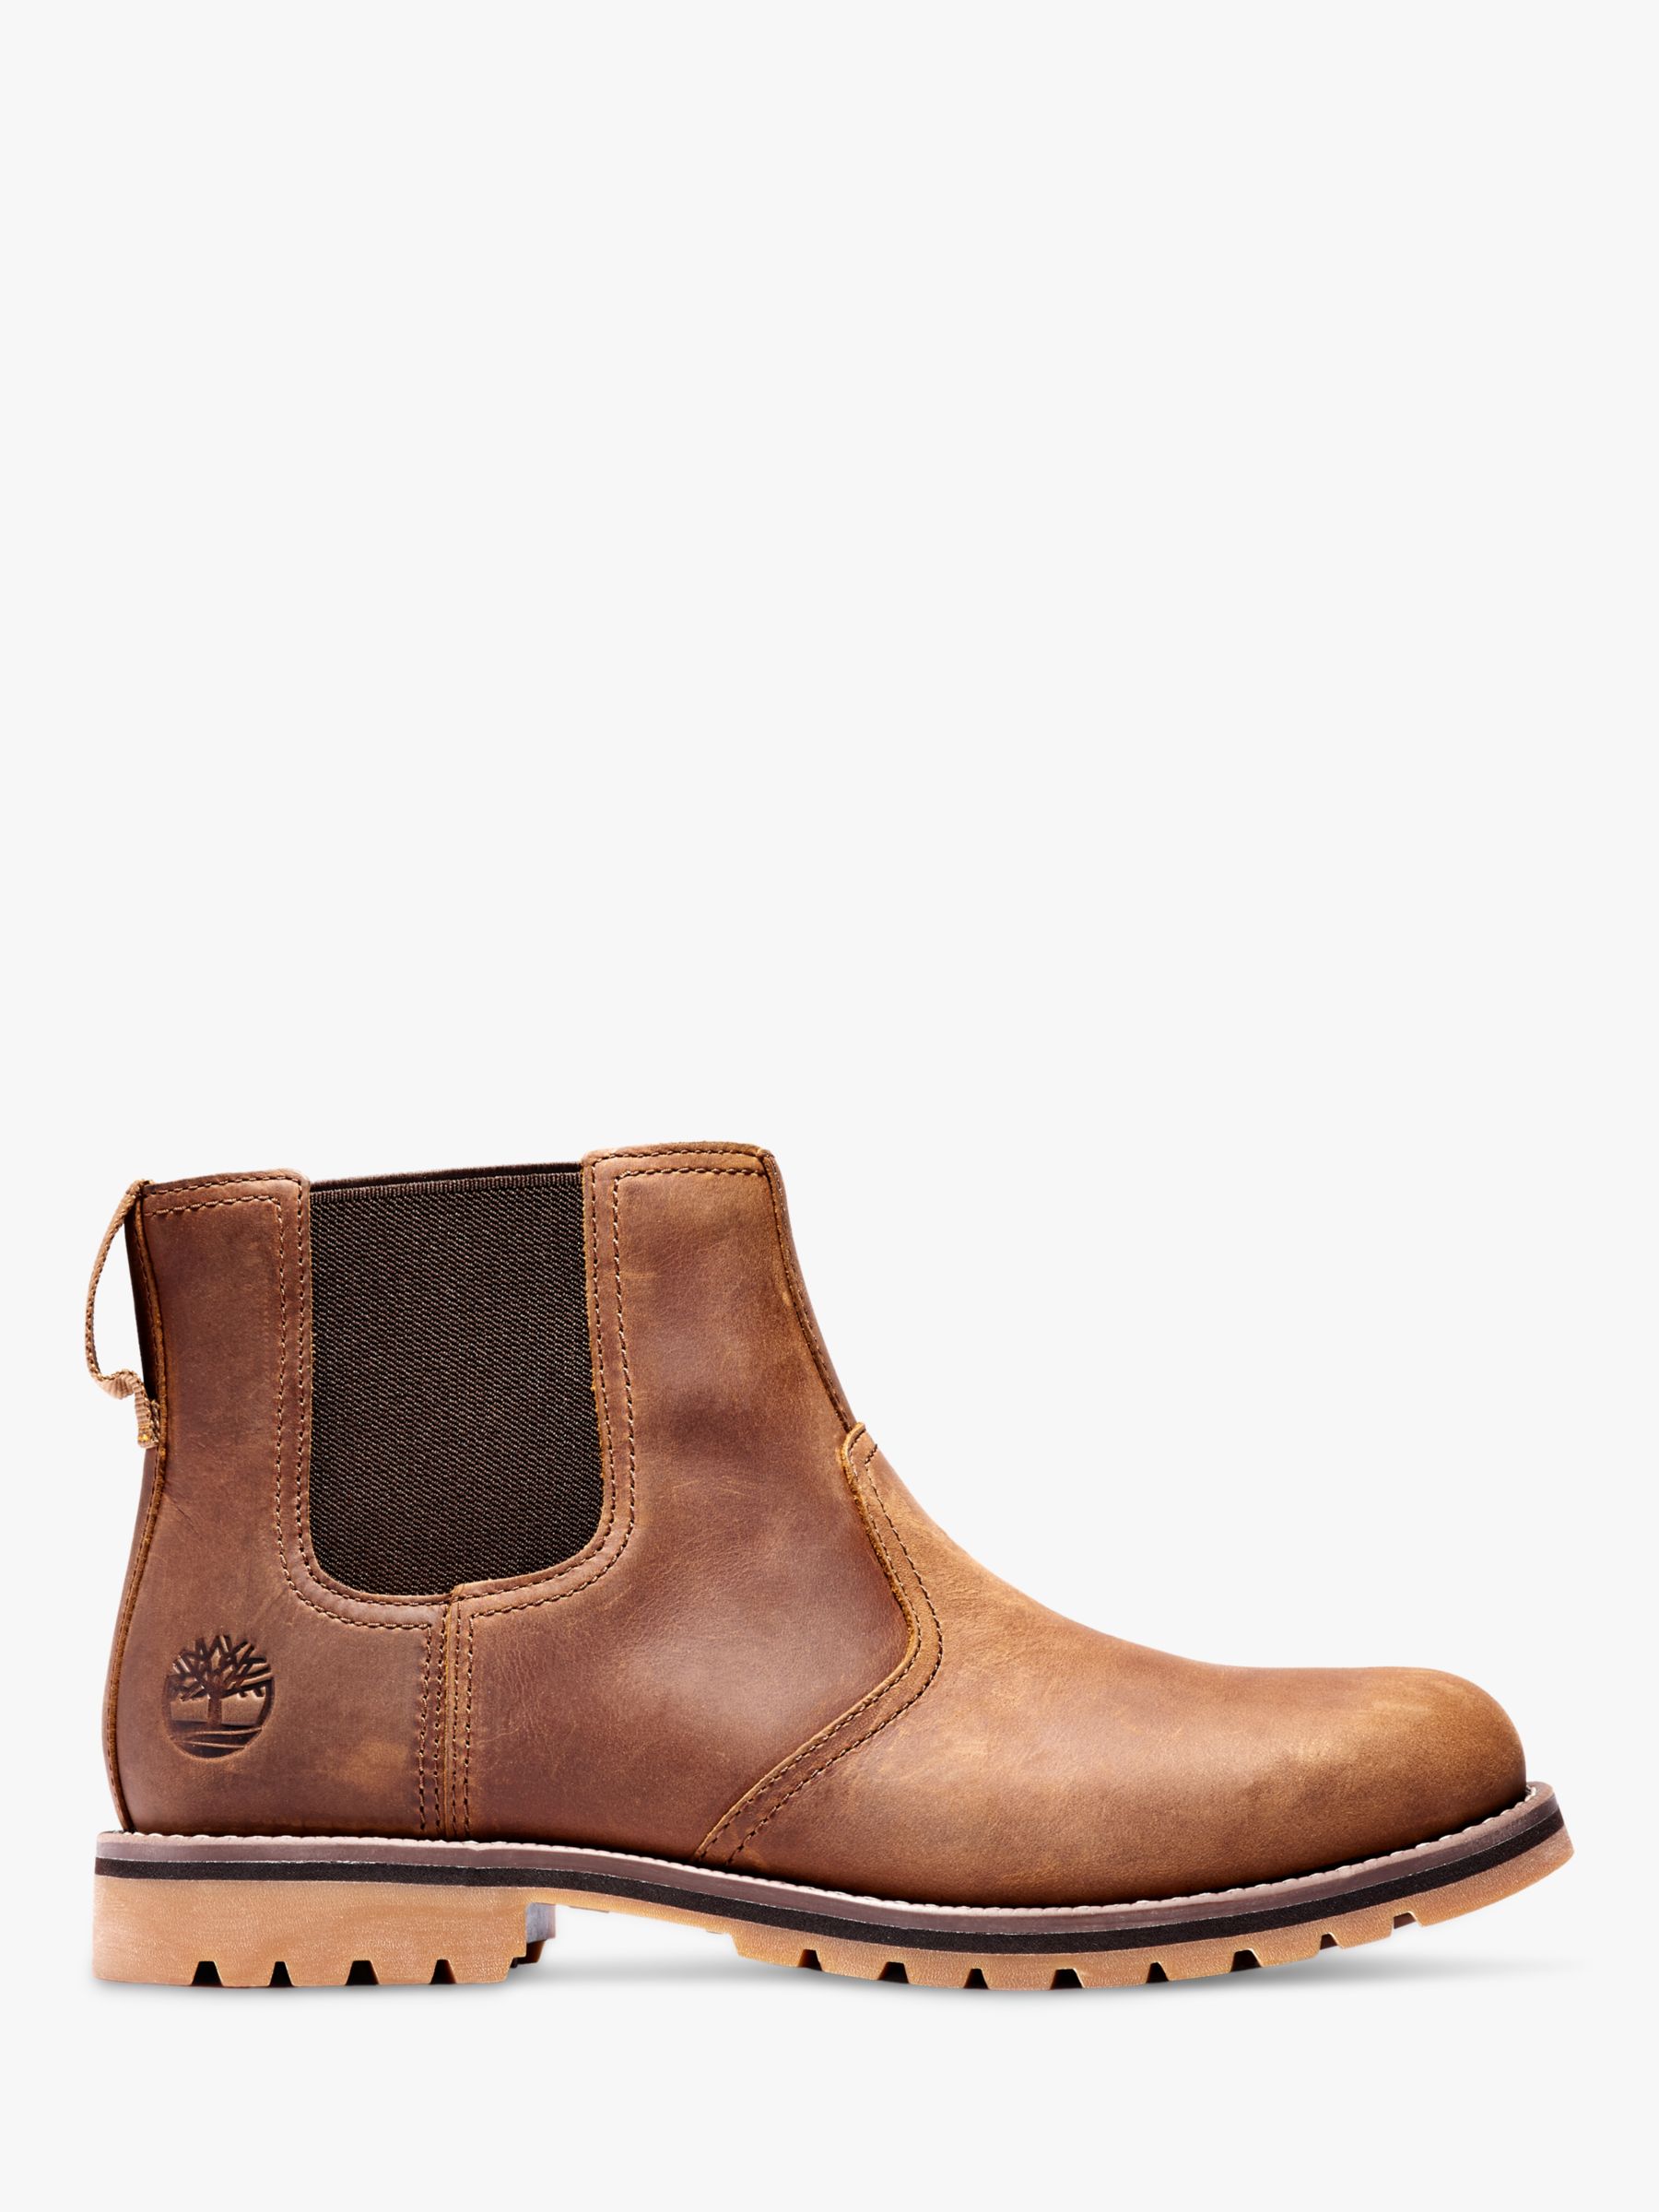 Timberland Larchmont Leather Chelsea Boots, Rust, 7